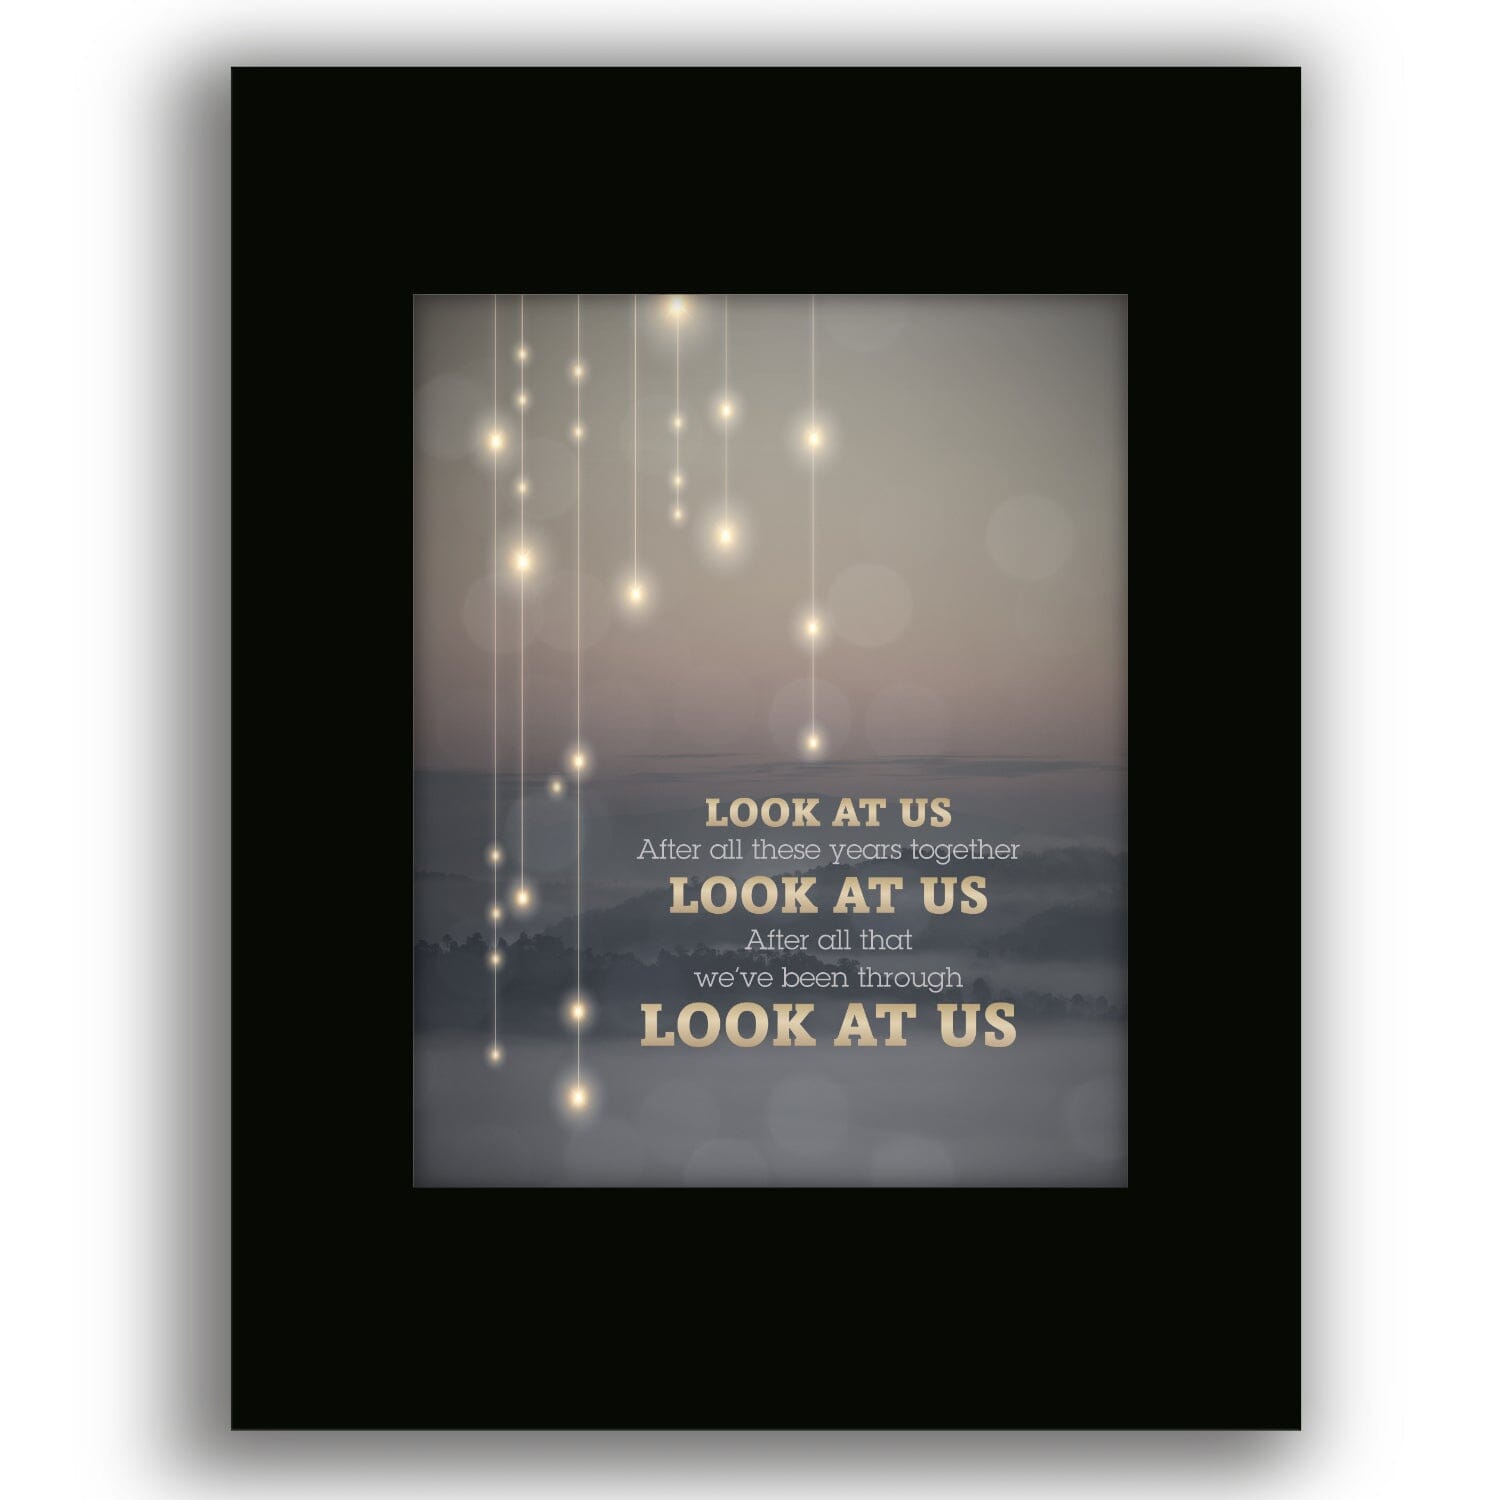 Look at Us by Vince Gill - Pop Country Song Art Song Lyrics Art Song Lyrics Art 8x10 Black Matted Print 